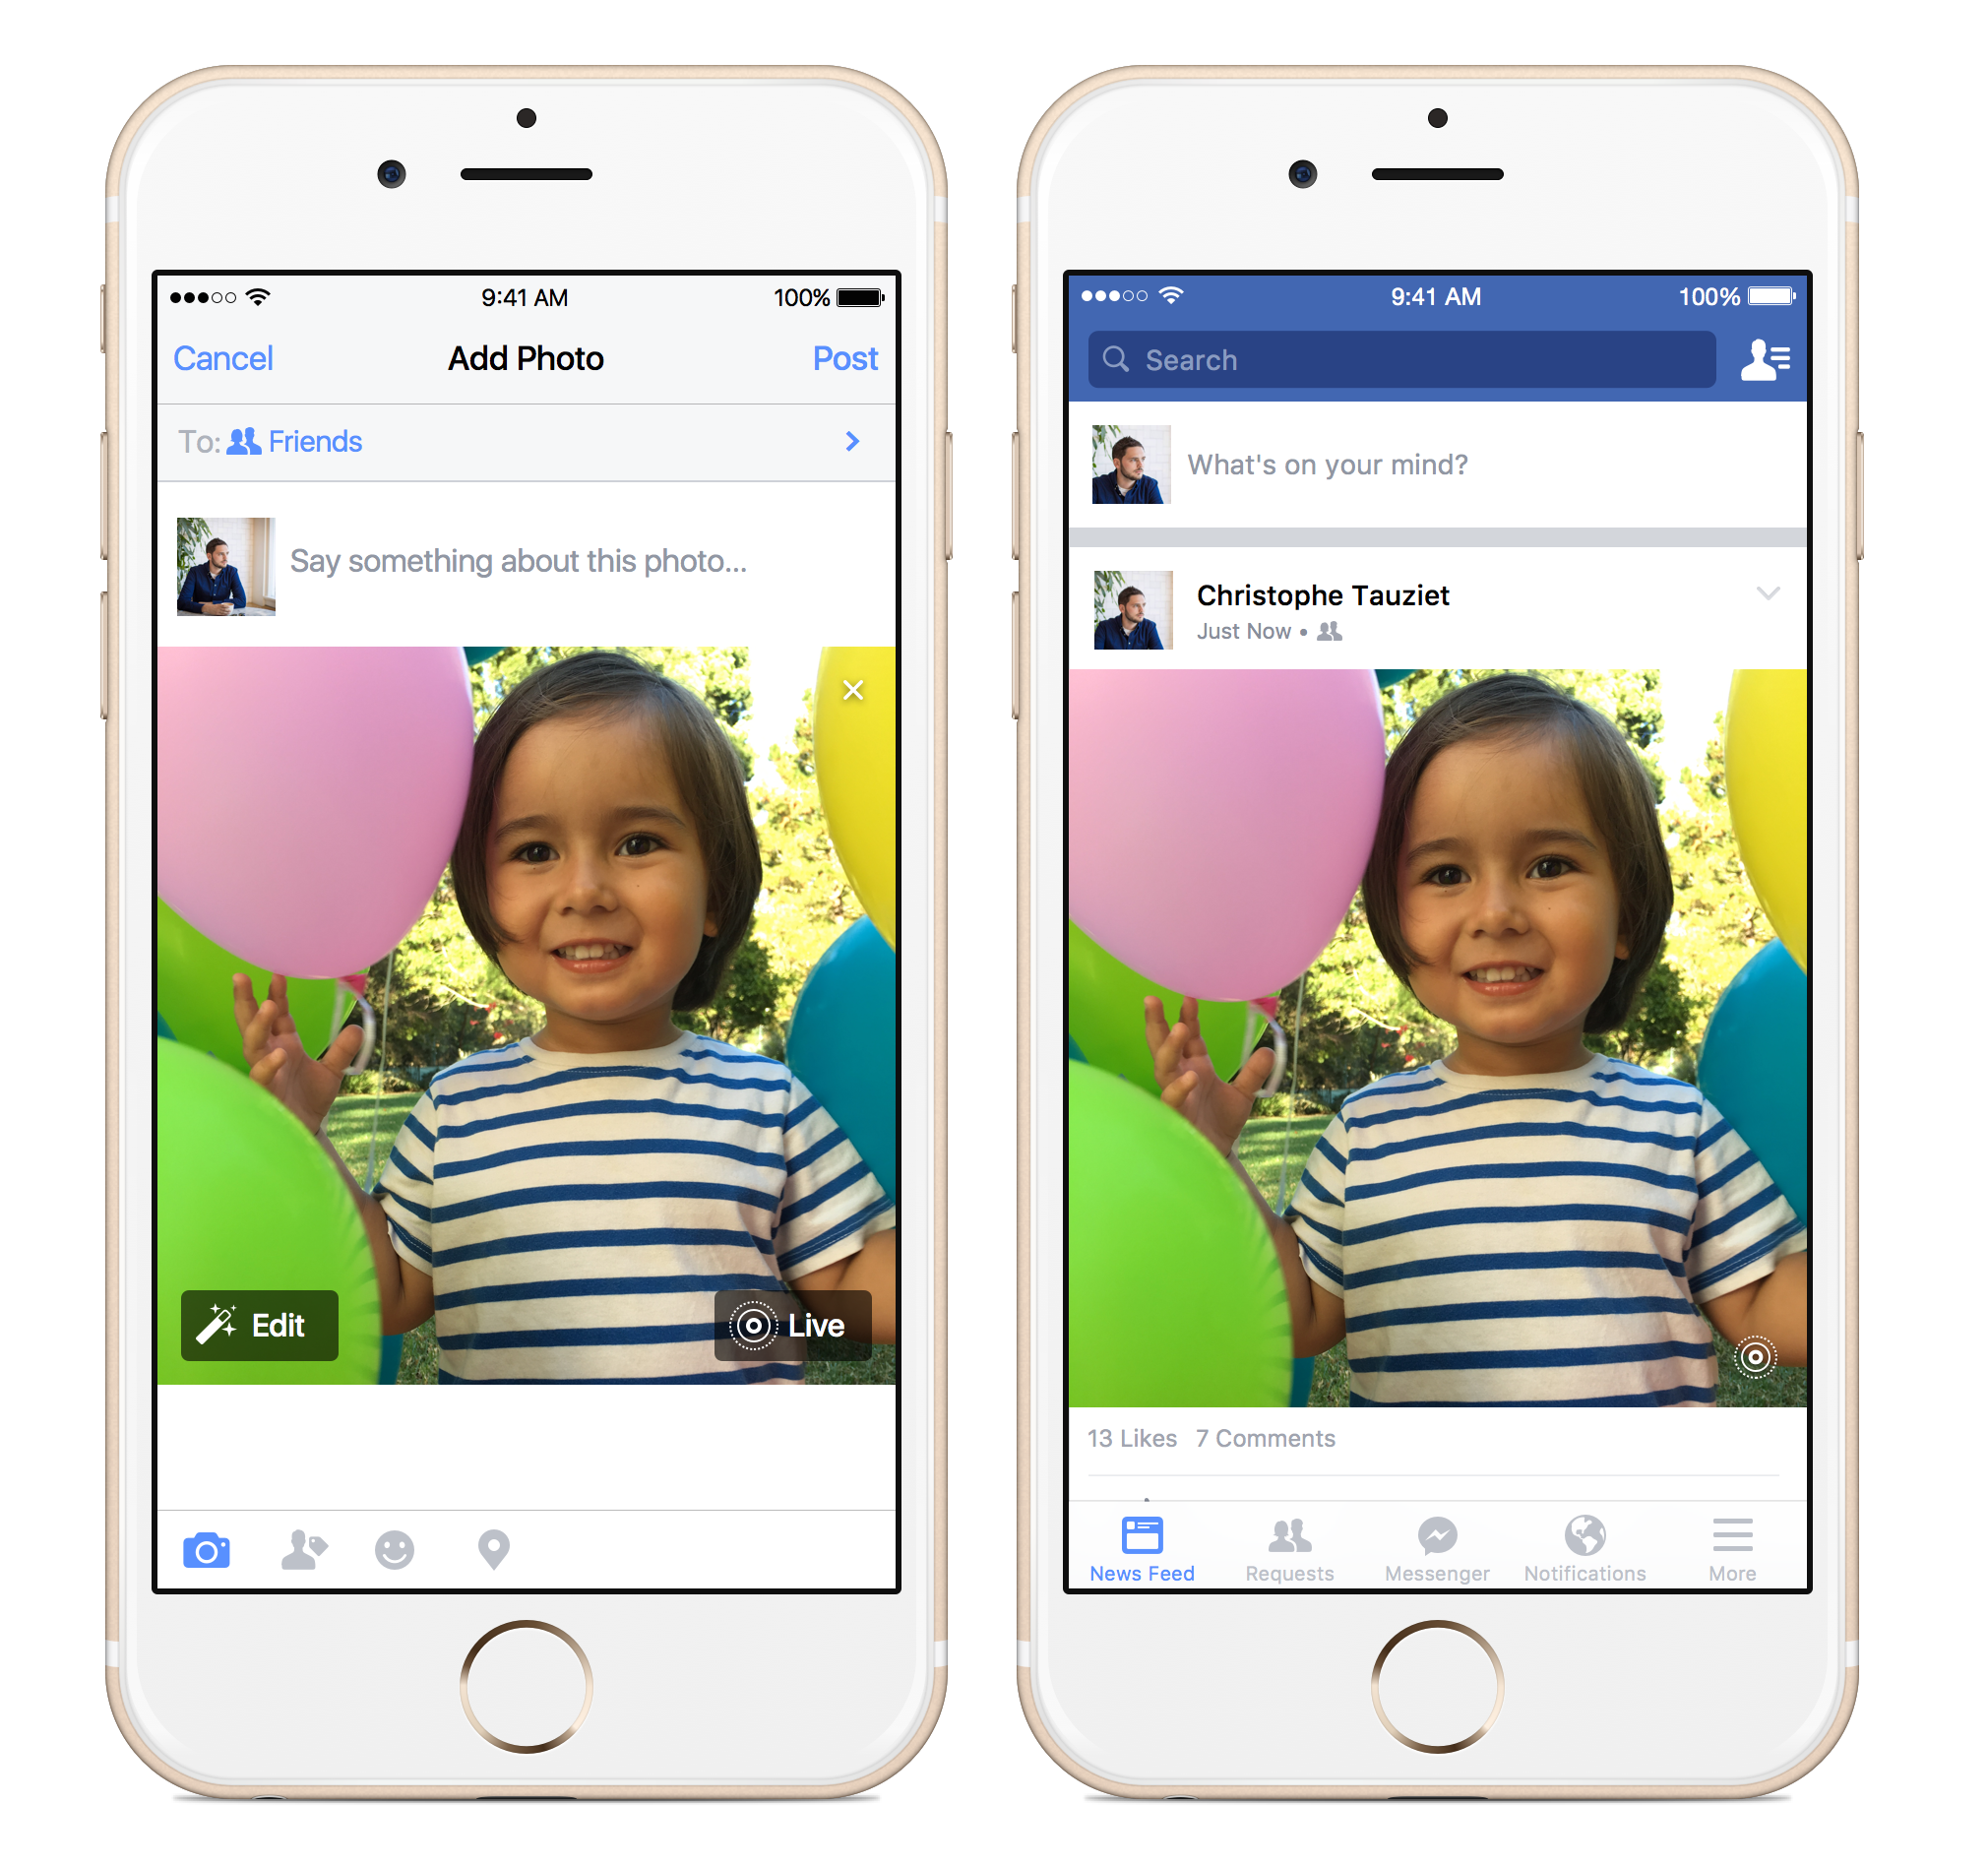 Facebook’s Live Photo Update Brings Interactive Media to a Global Scale